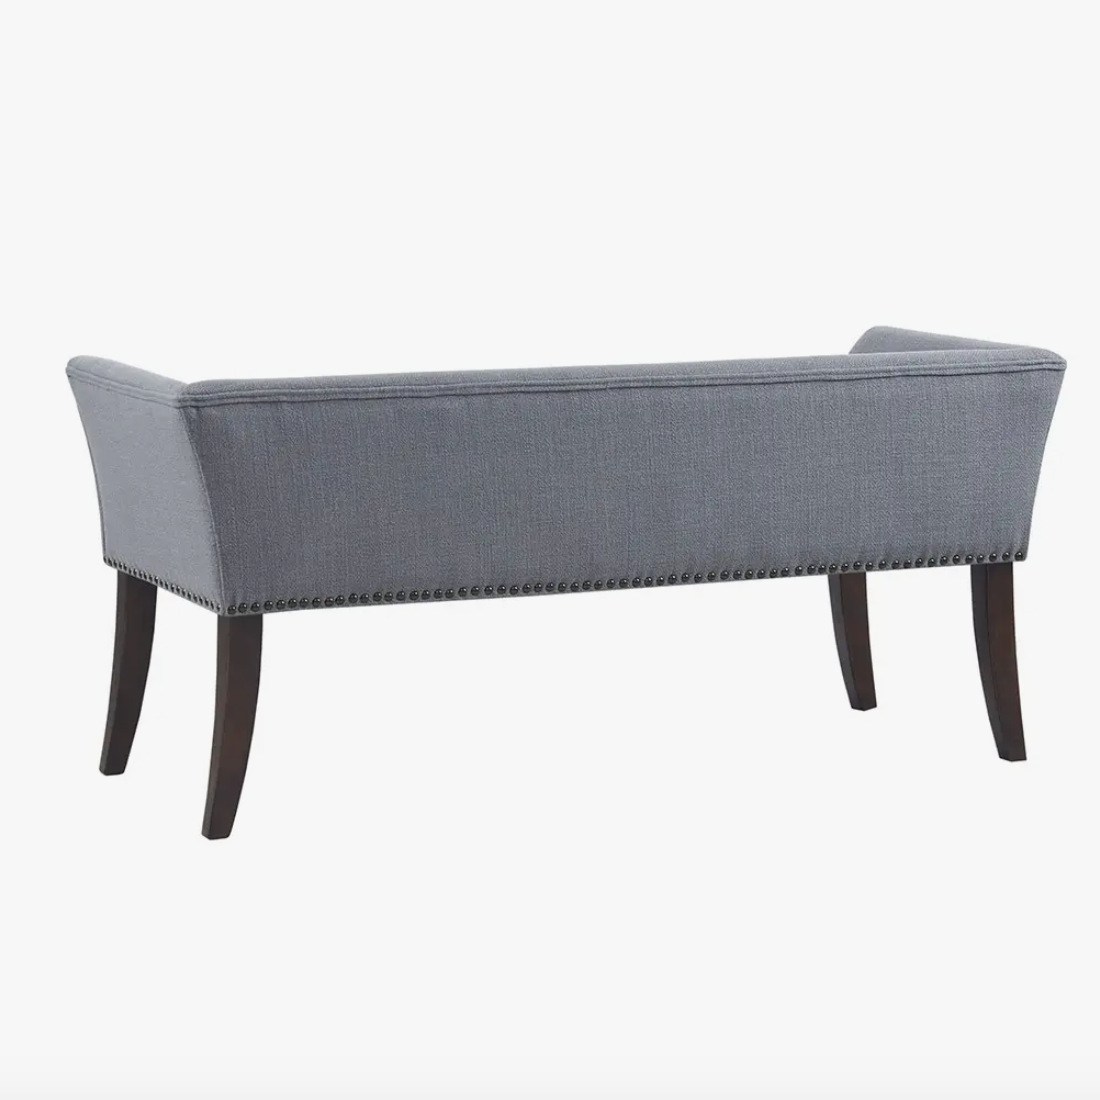 "Slate & Charm" - Flared, Low Back Accent Bench